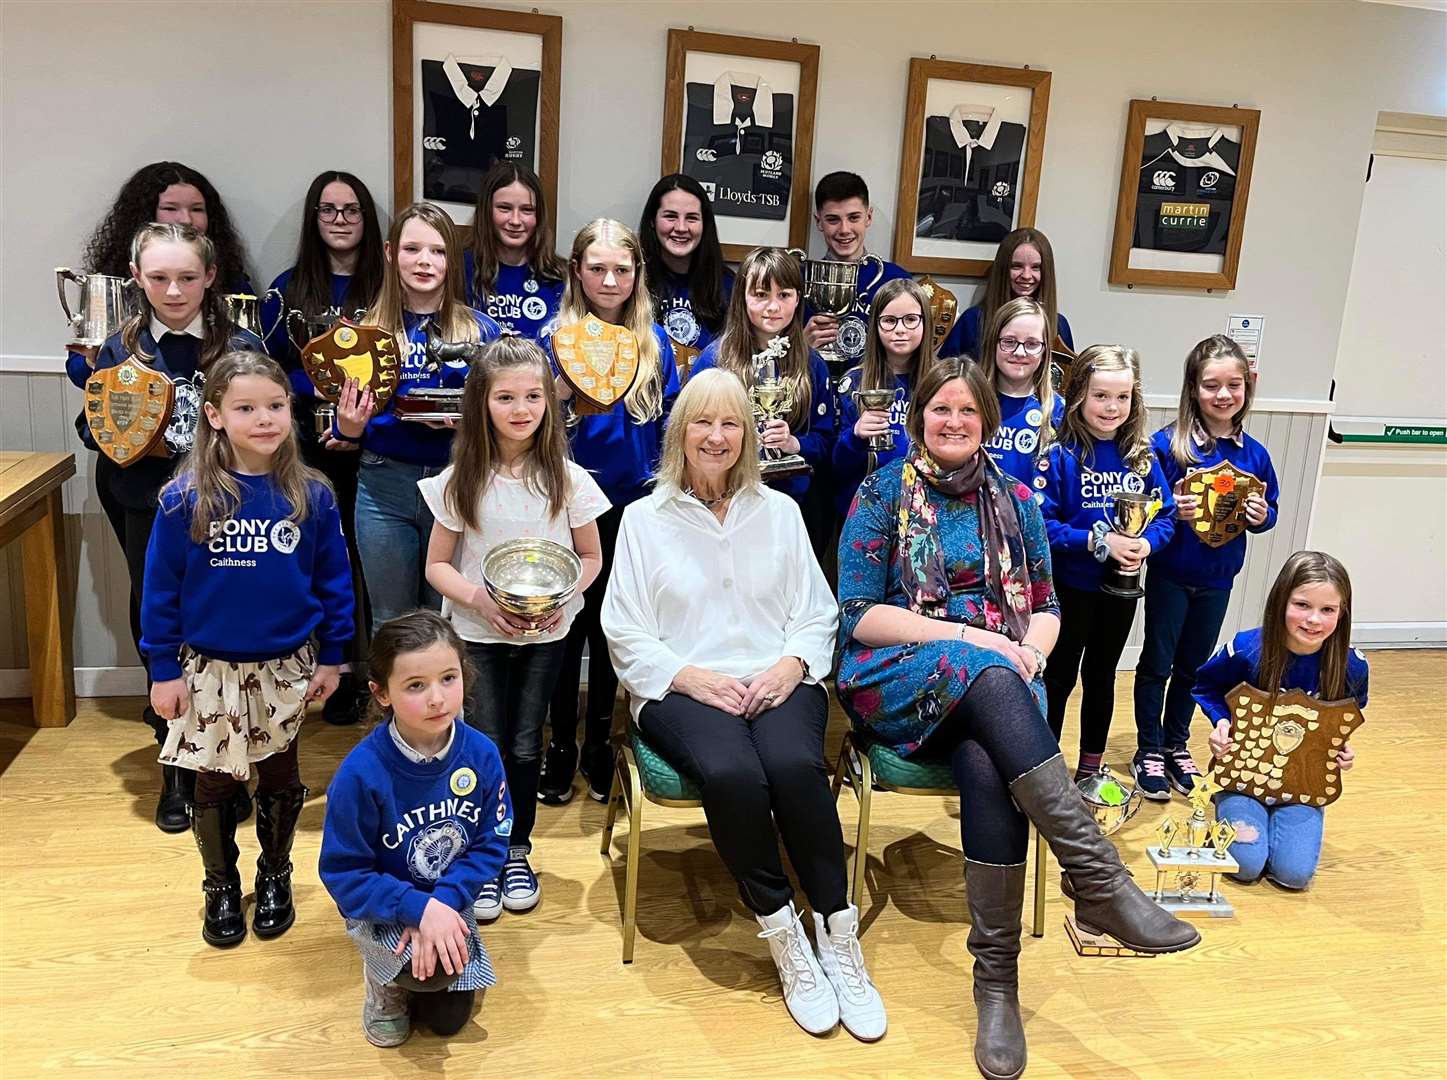 Members of the Caithness branch of the Pony Club along with retiring committee member Pauline Coghill (seated, front left) and district commissioner Debbie Pottinger.